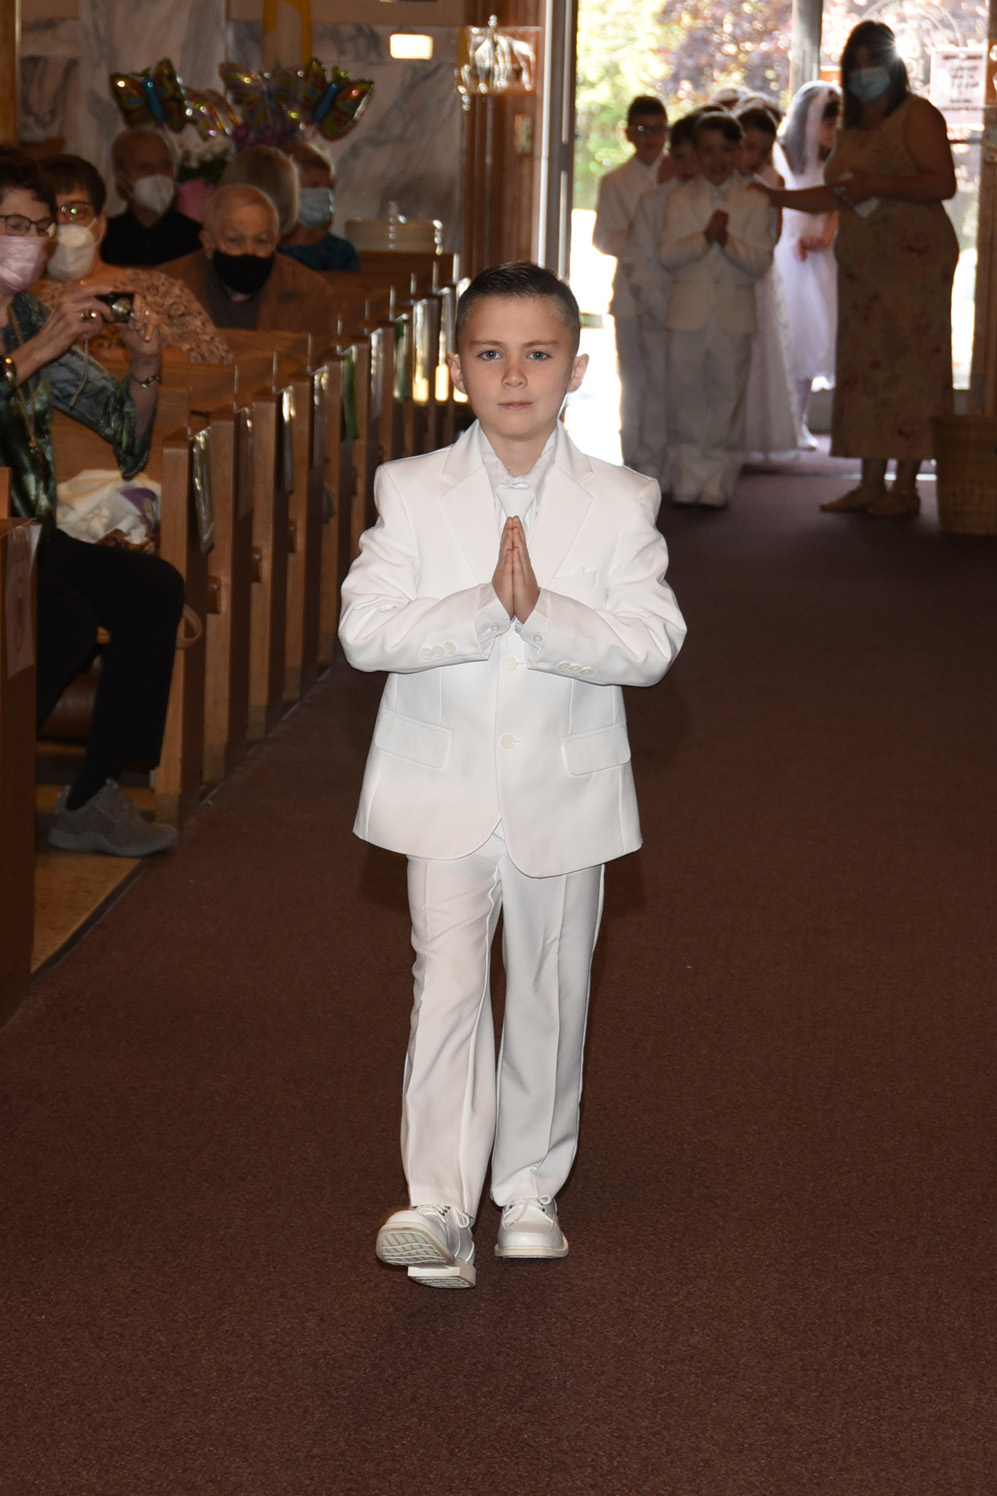 FIRST-COMMUNION-MAY-16-2021-32